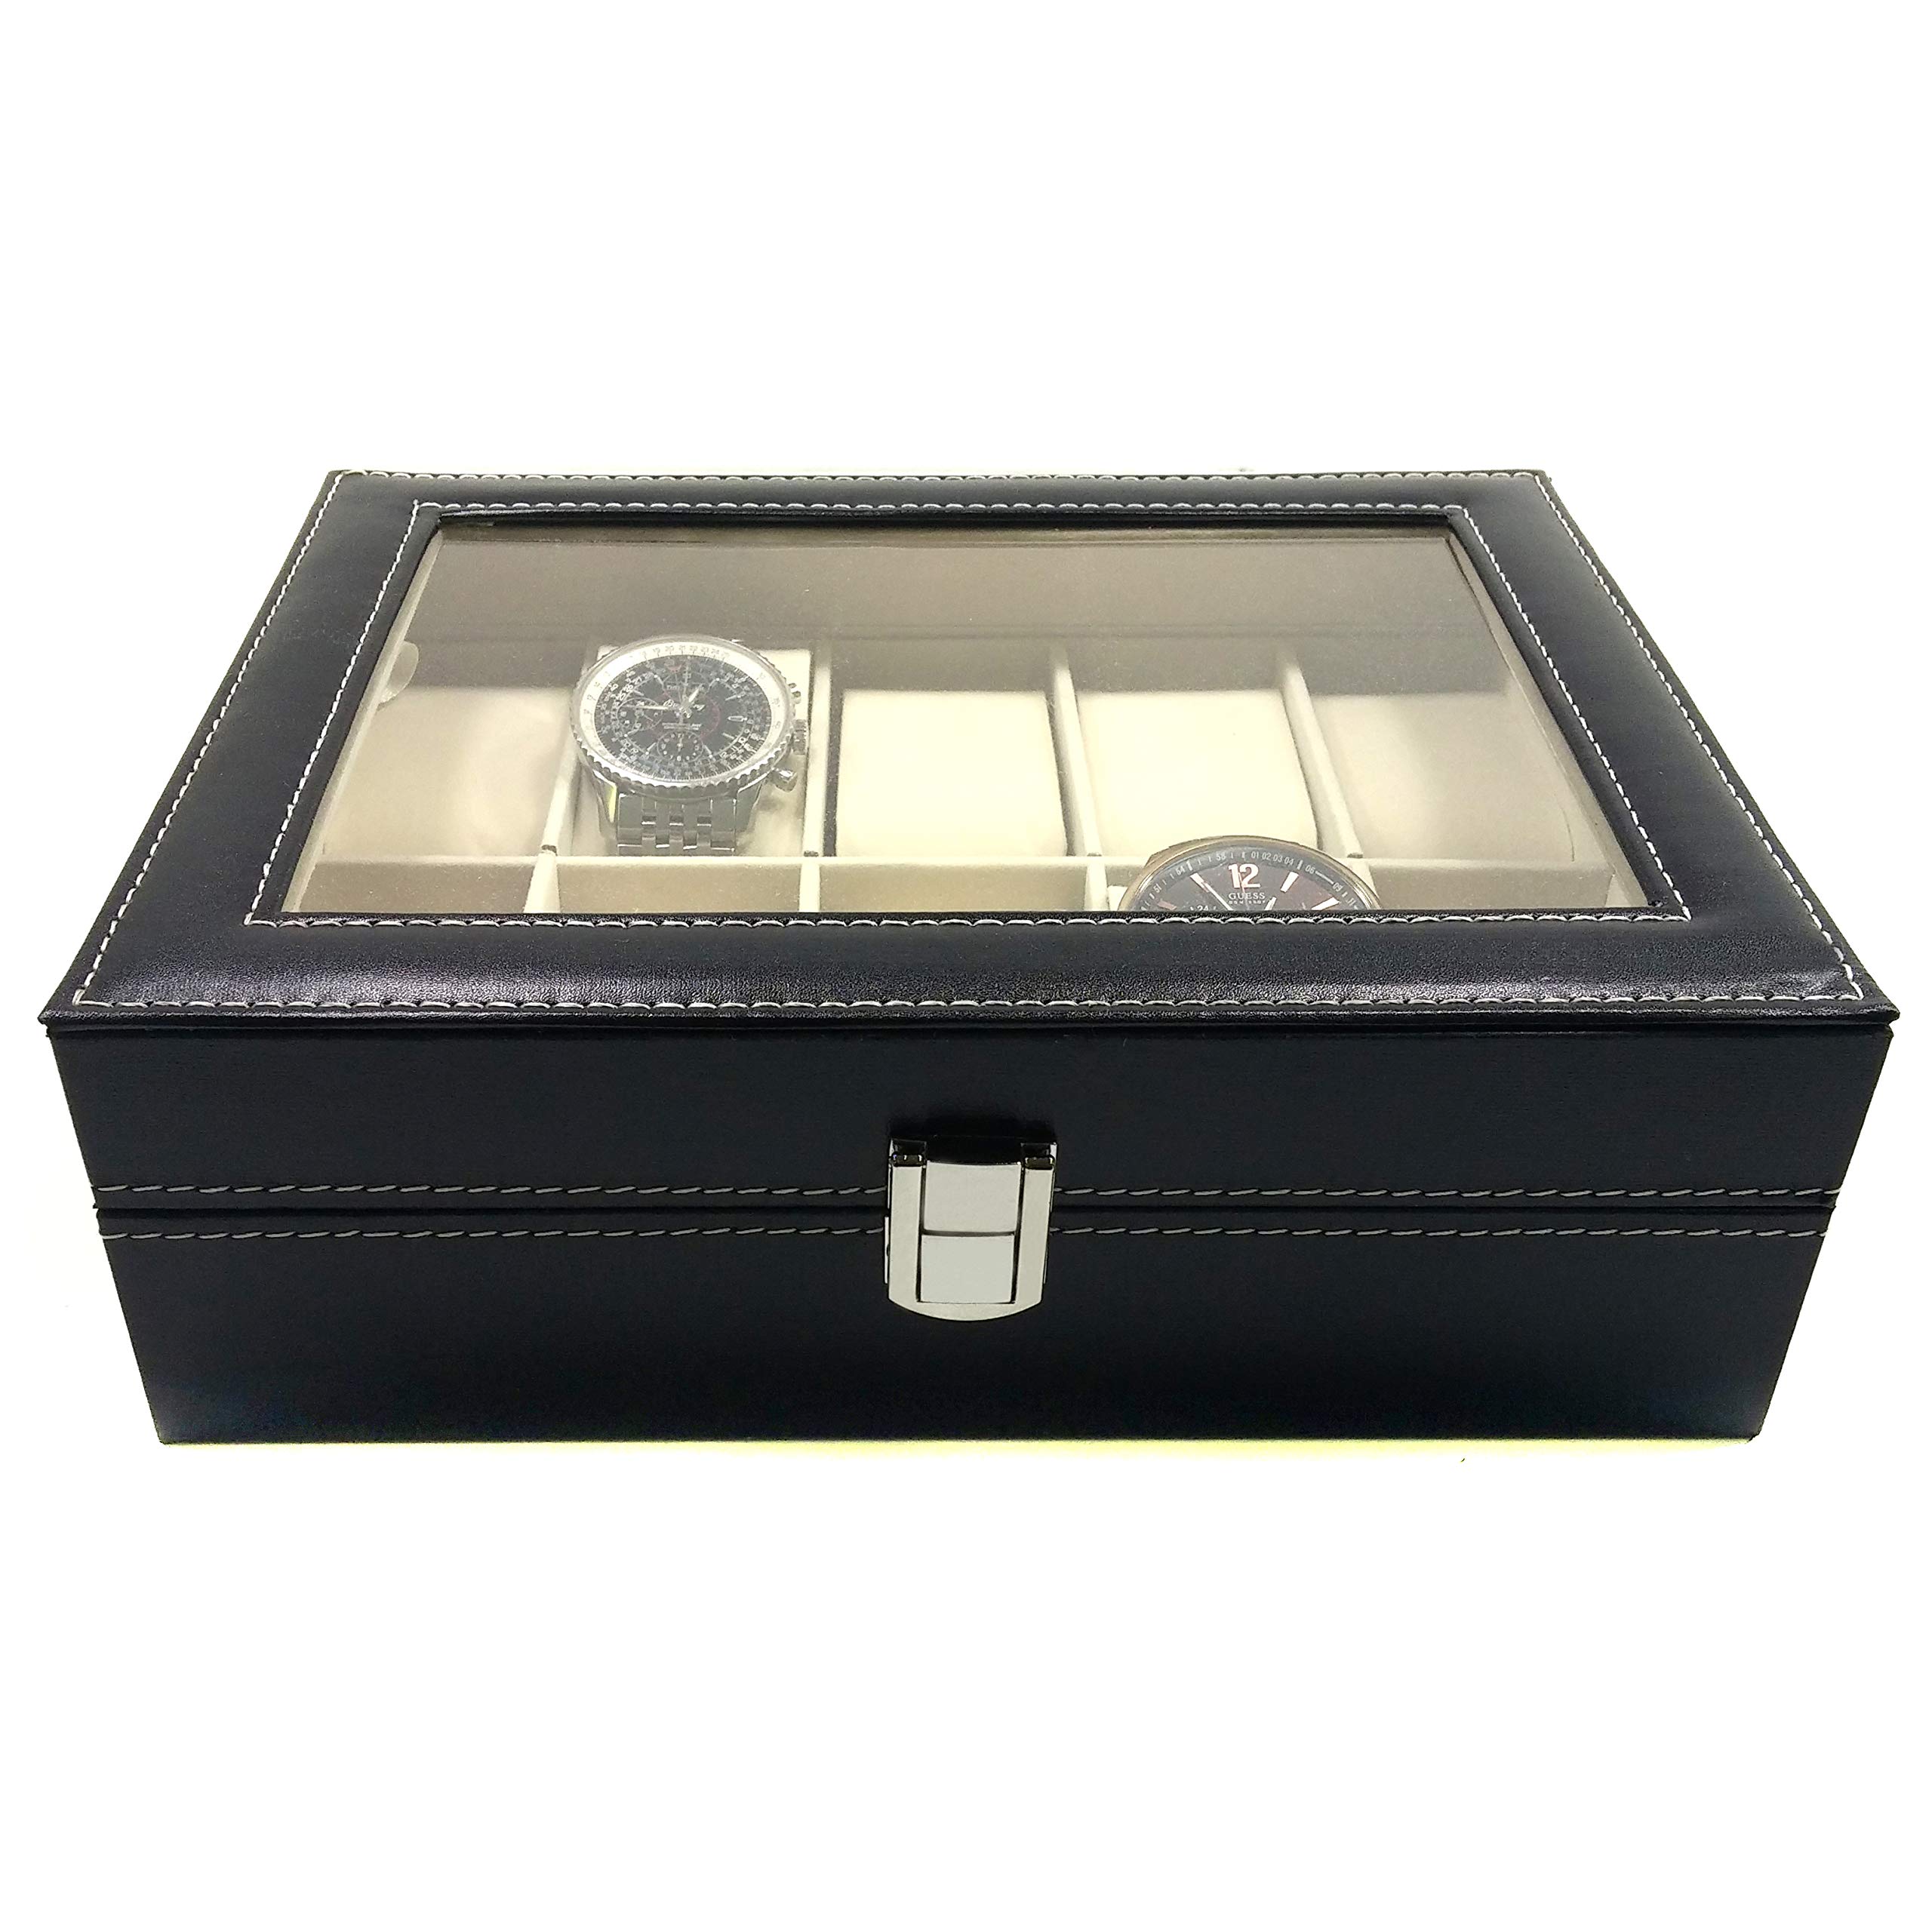 SciencePurchase Faux Leather Display Glass Top Jewelry Case Organizer, 10 Mens Watch Box, Black